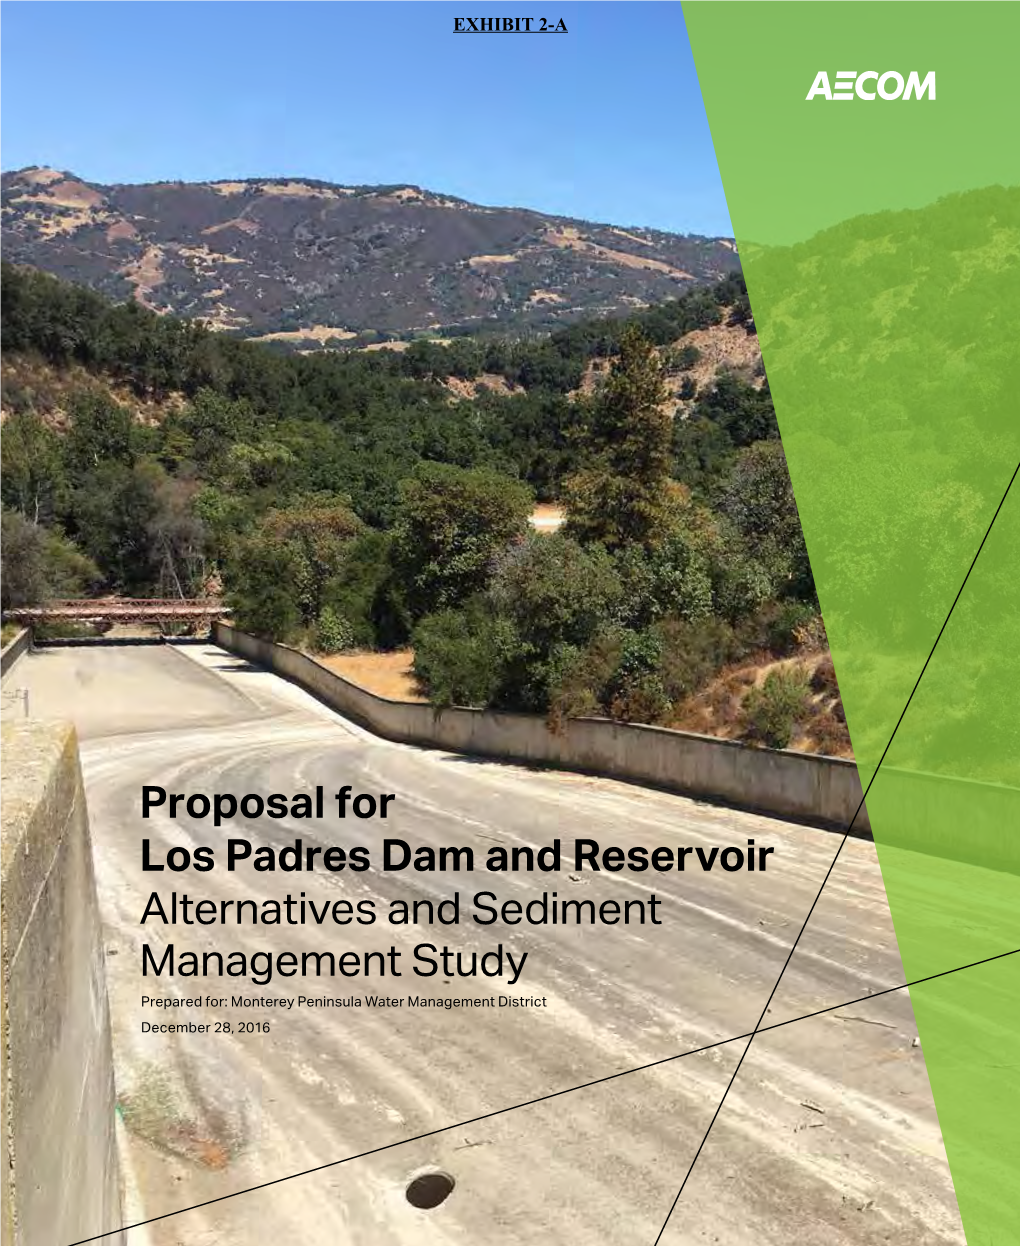 Proposal for Los Padres Dam and Reservoir Alternatives and Sediment